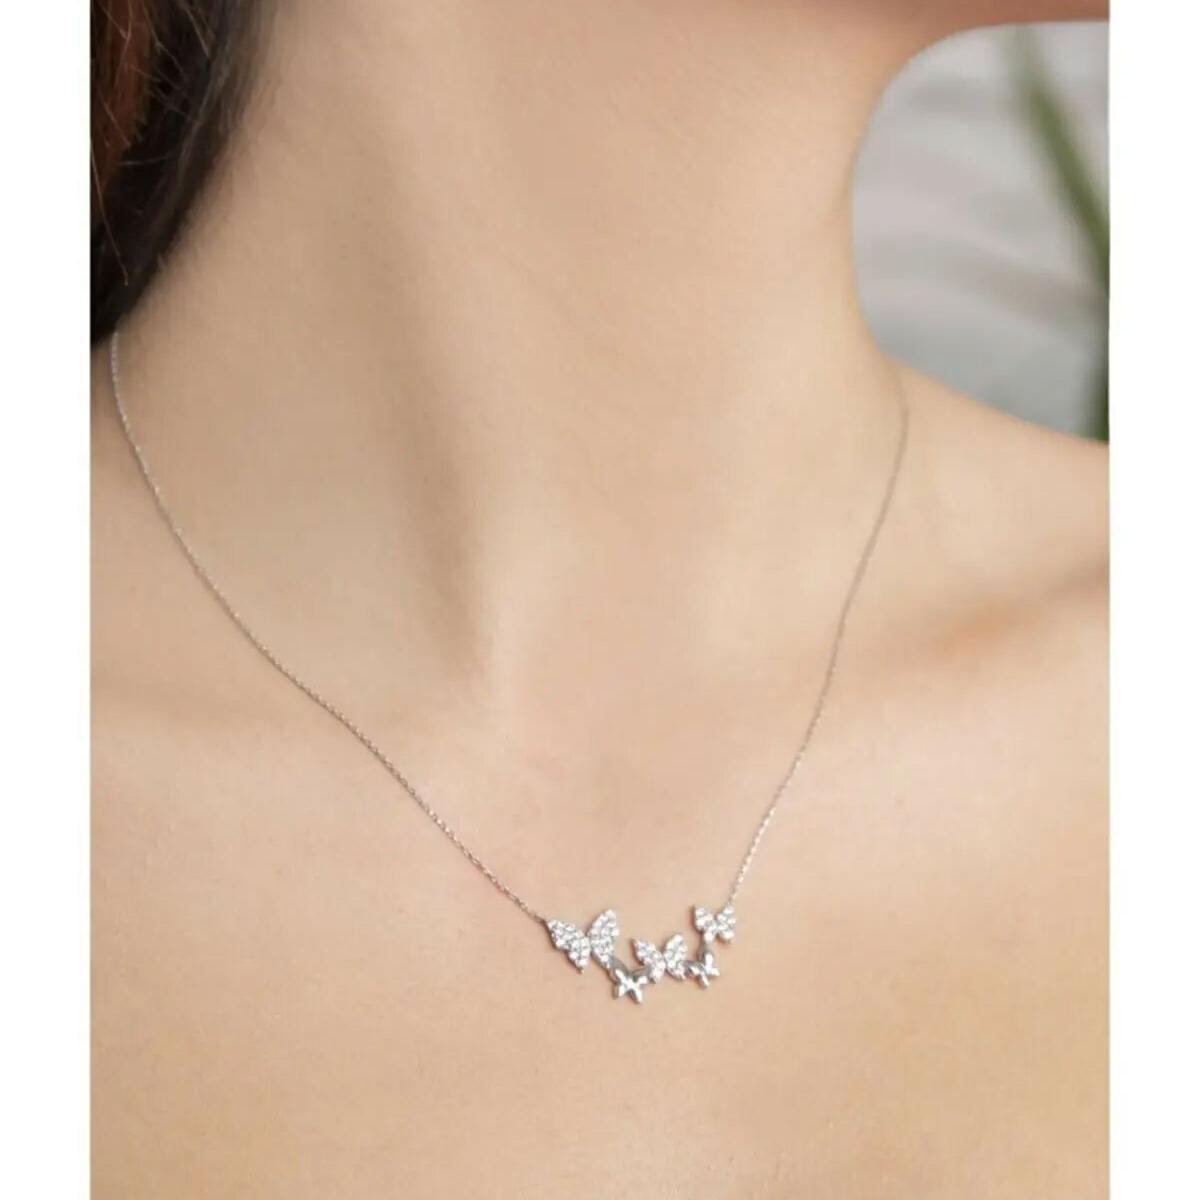 Dainty Diamond Butterfly Necklace • Cute Butterfly Necklace Silver - Trending Silver Gifts